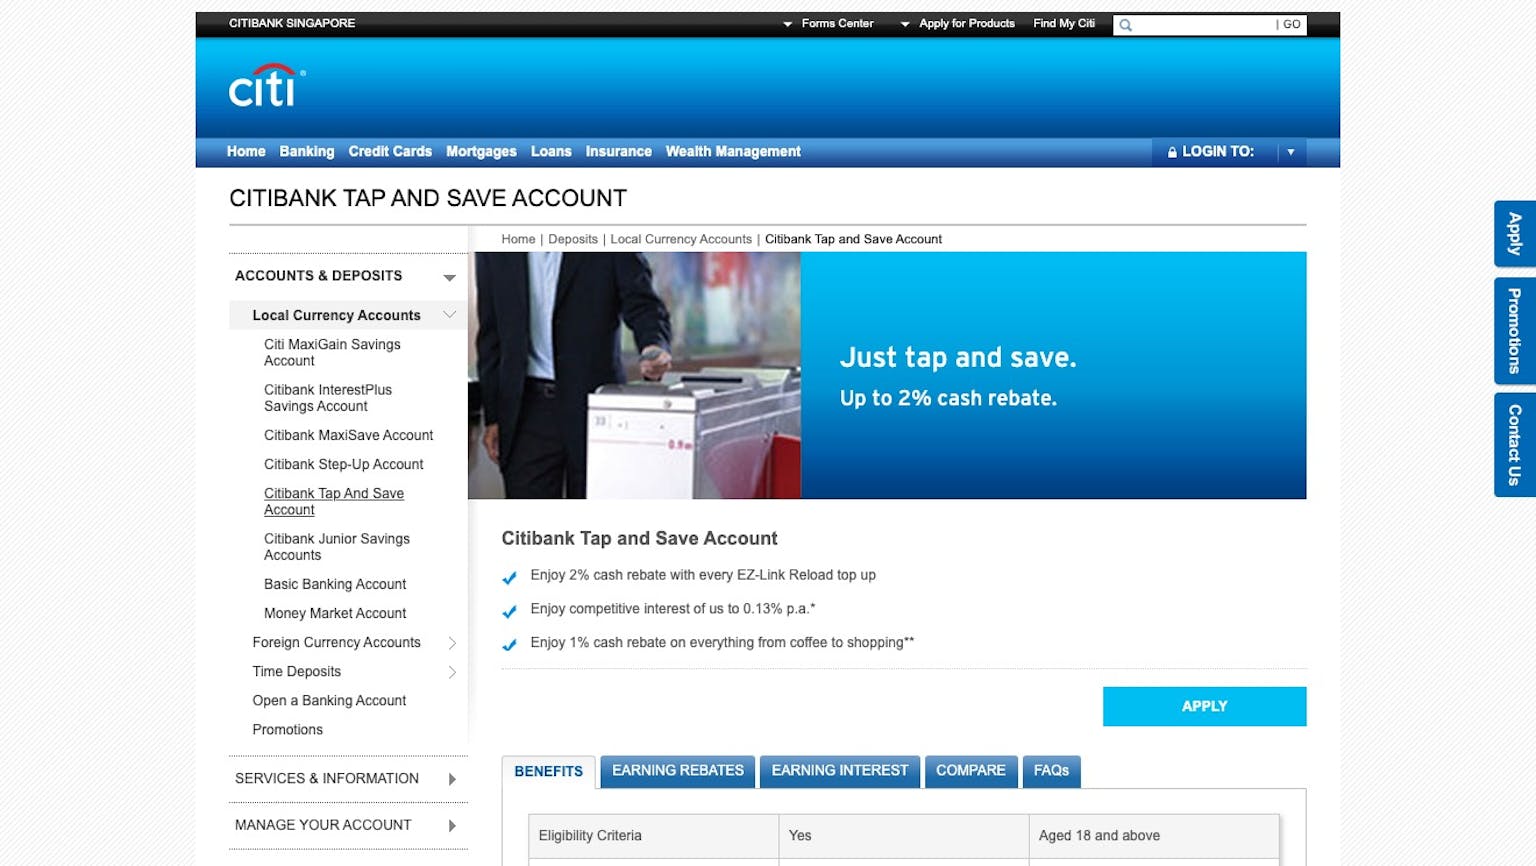 Citibank Tap and Save Account